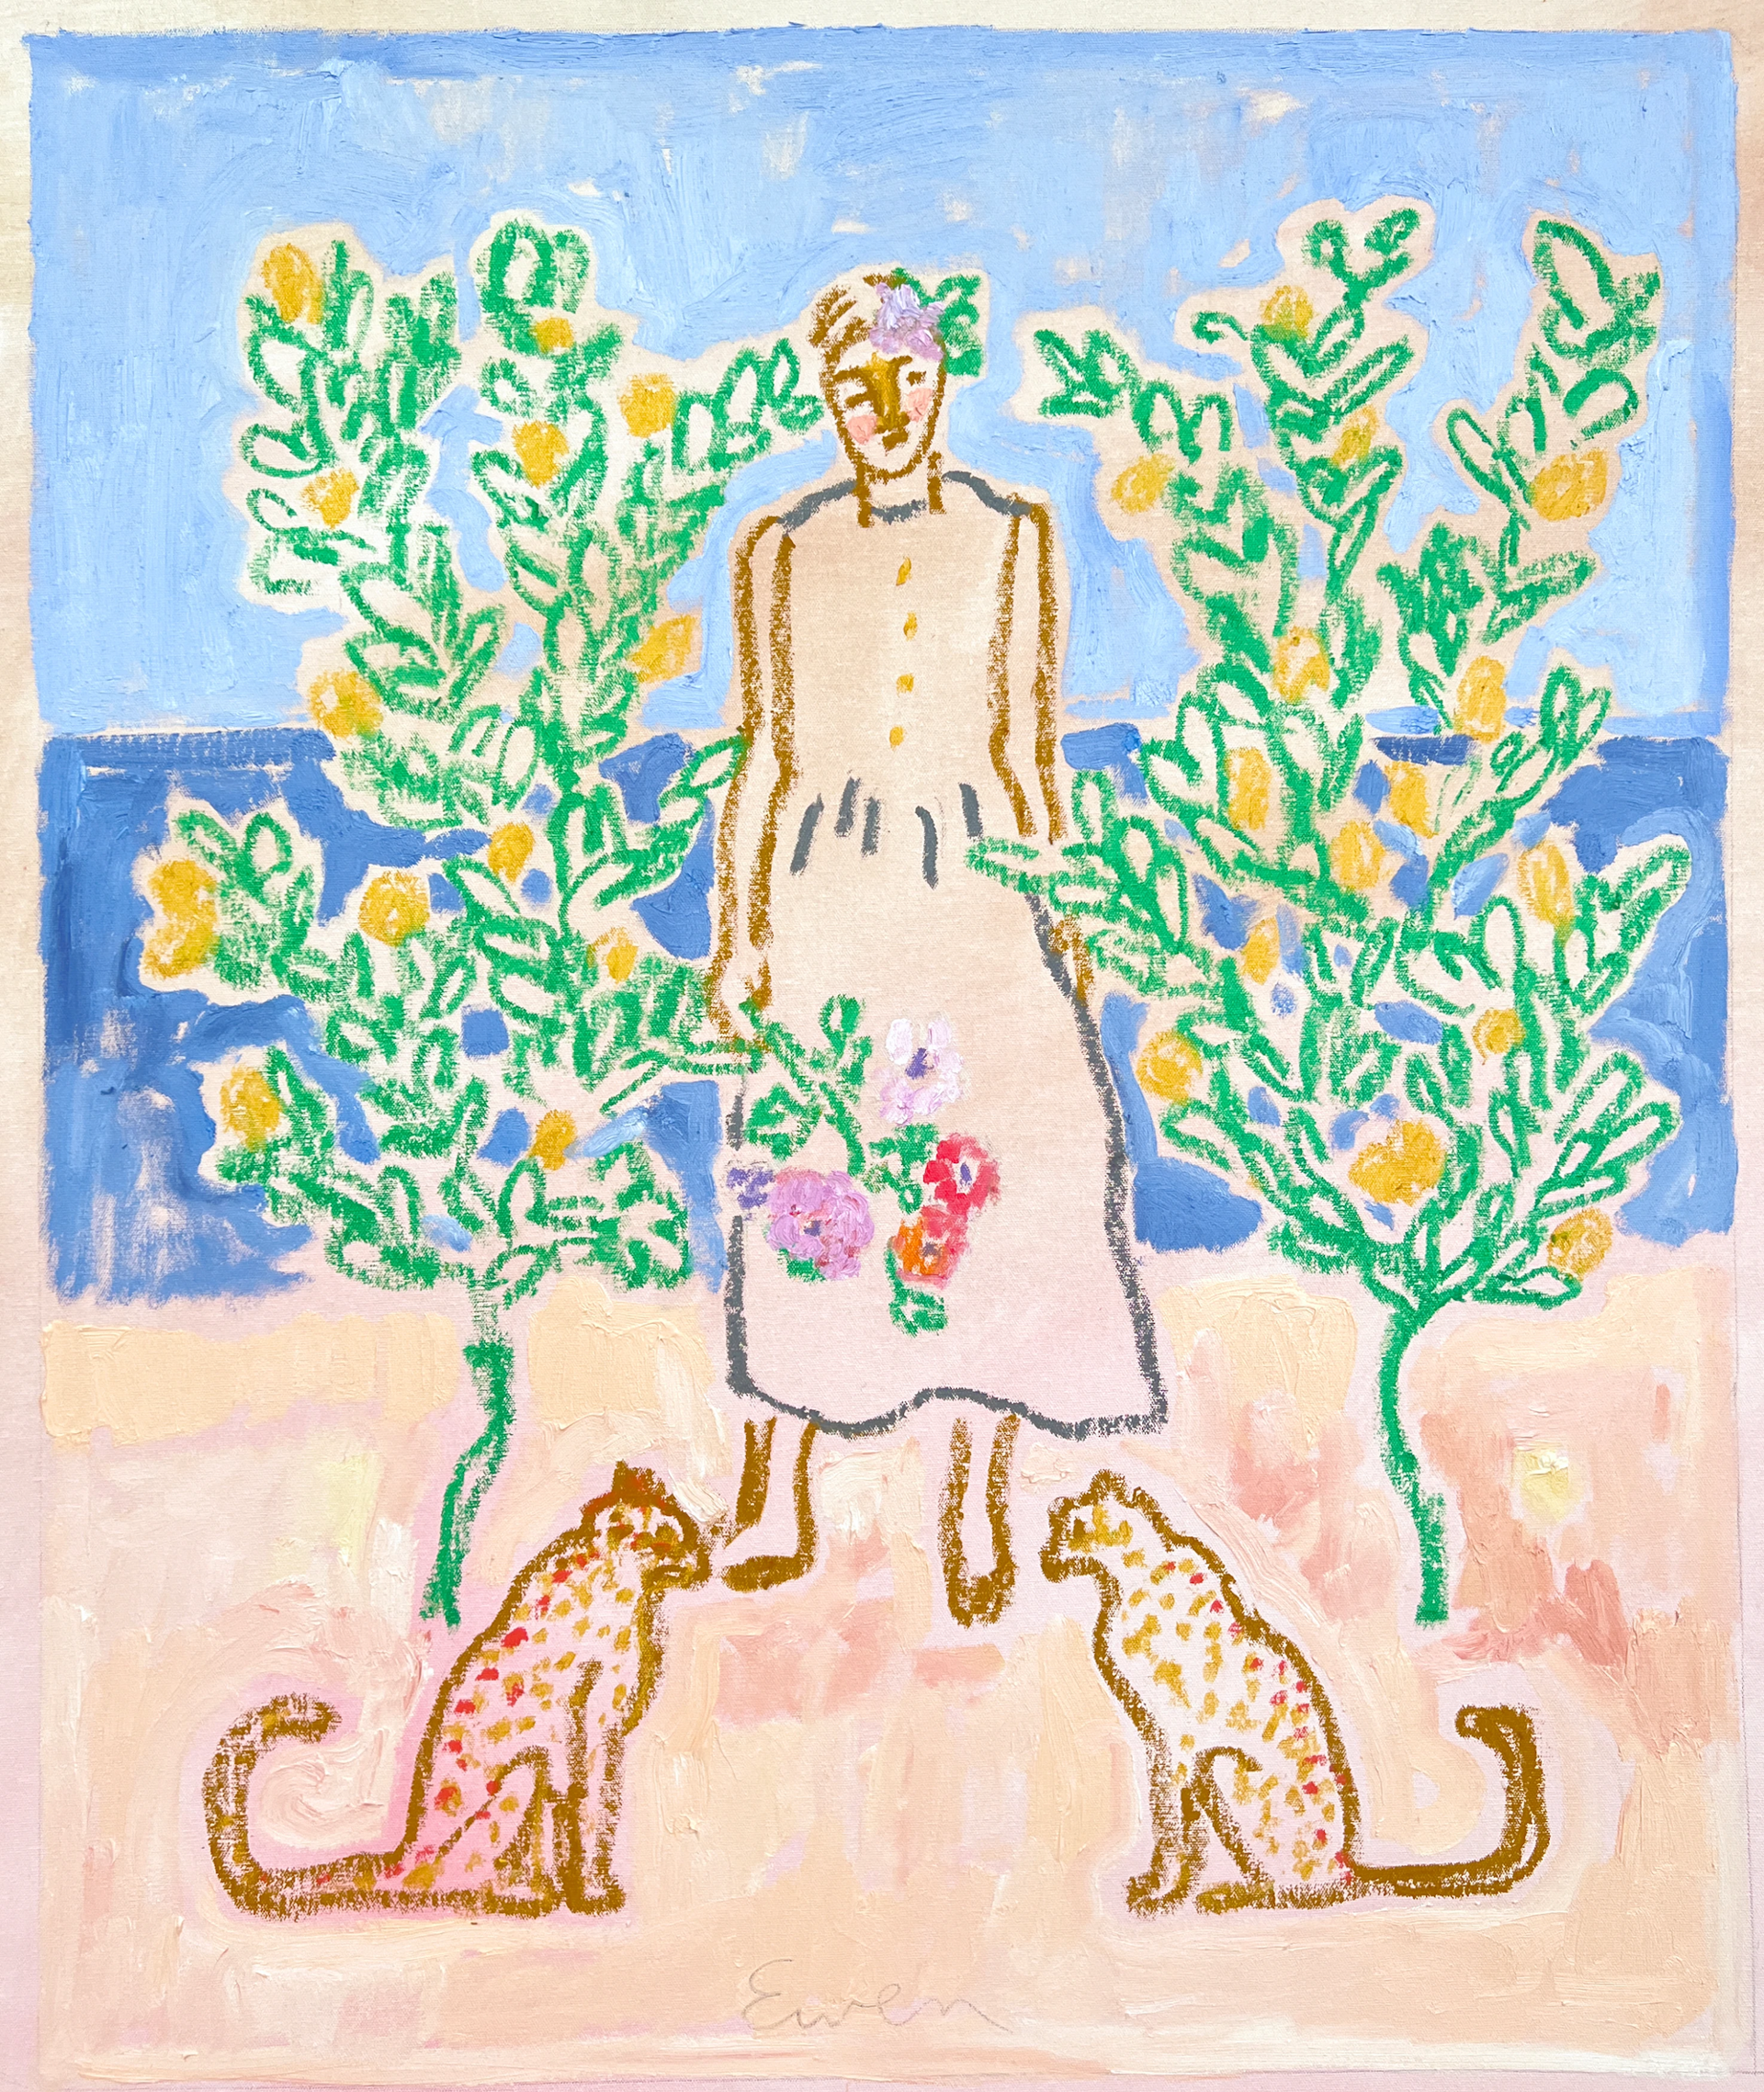 Circe and her Golden Lemons with Cats by Anne-Louise Ewen